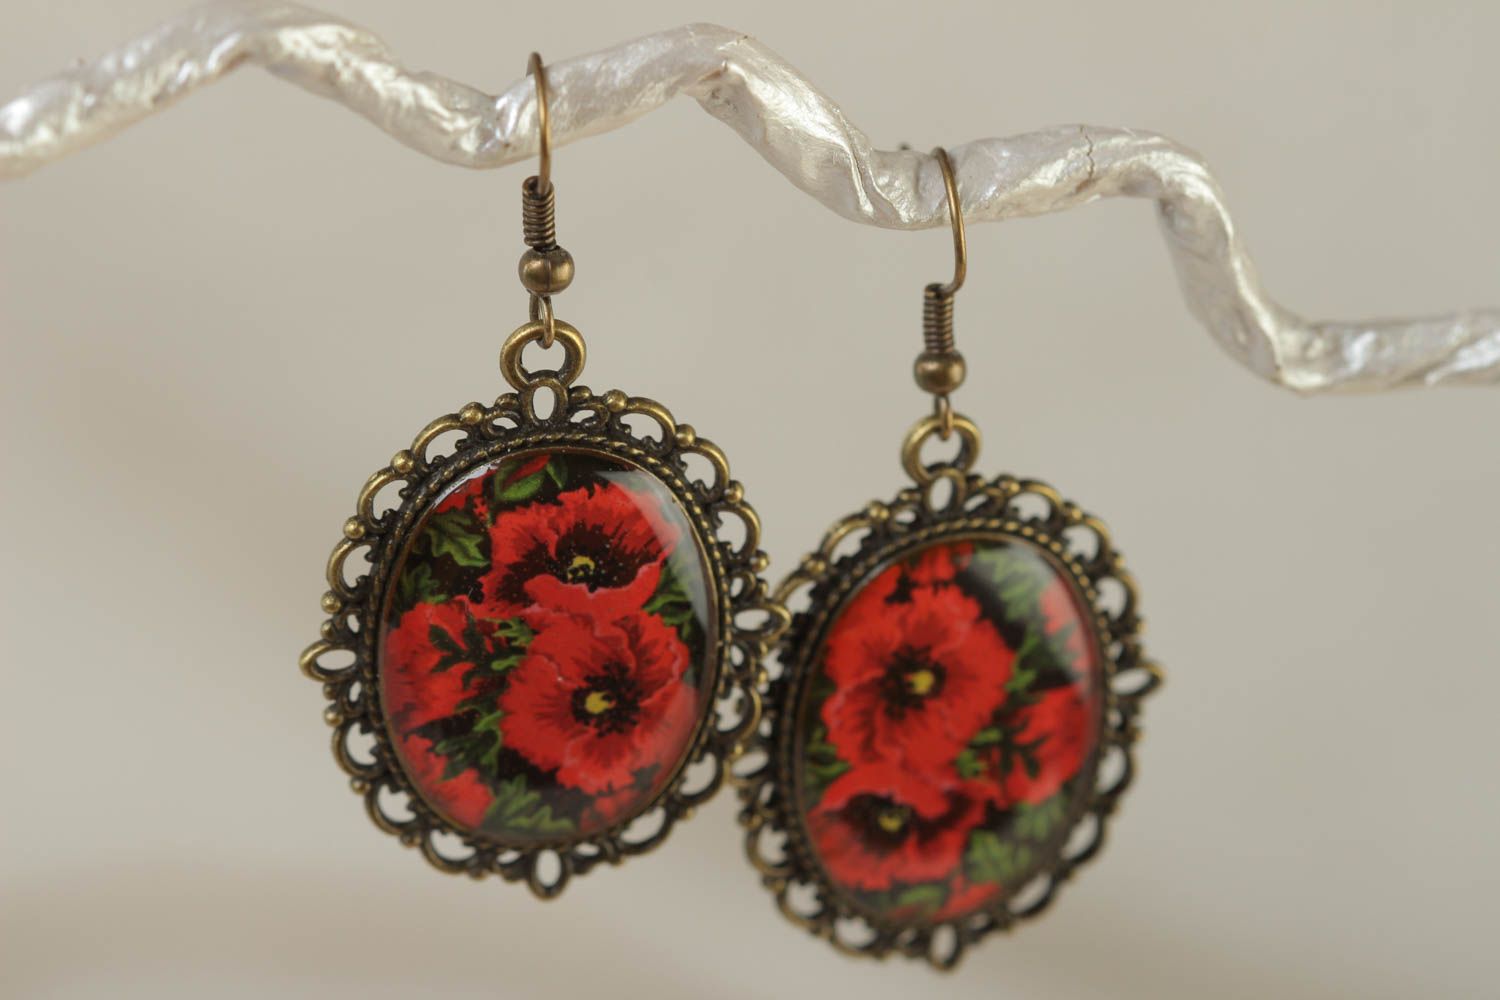 Egg-shaped vintage handmade earrings made of glass glaze with red poppies photo 1